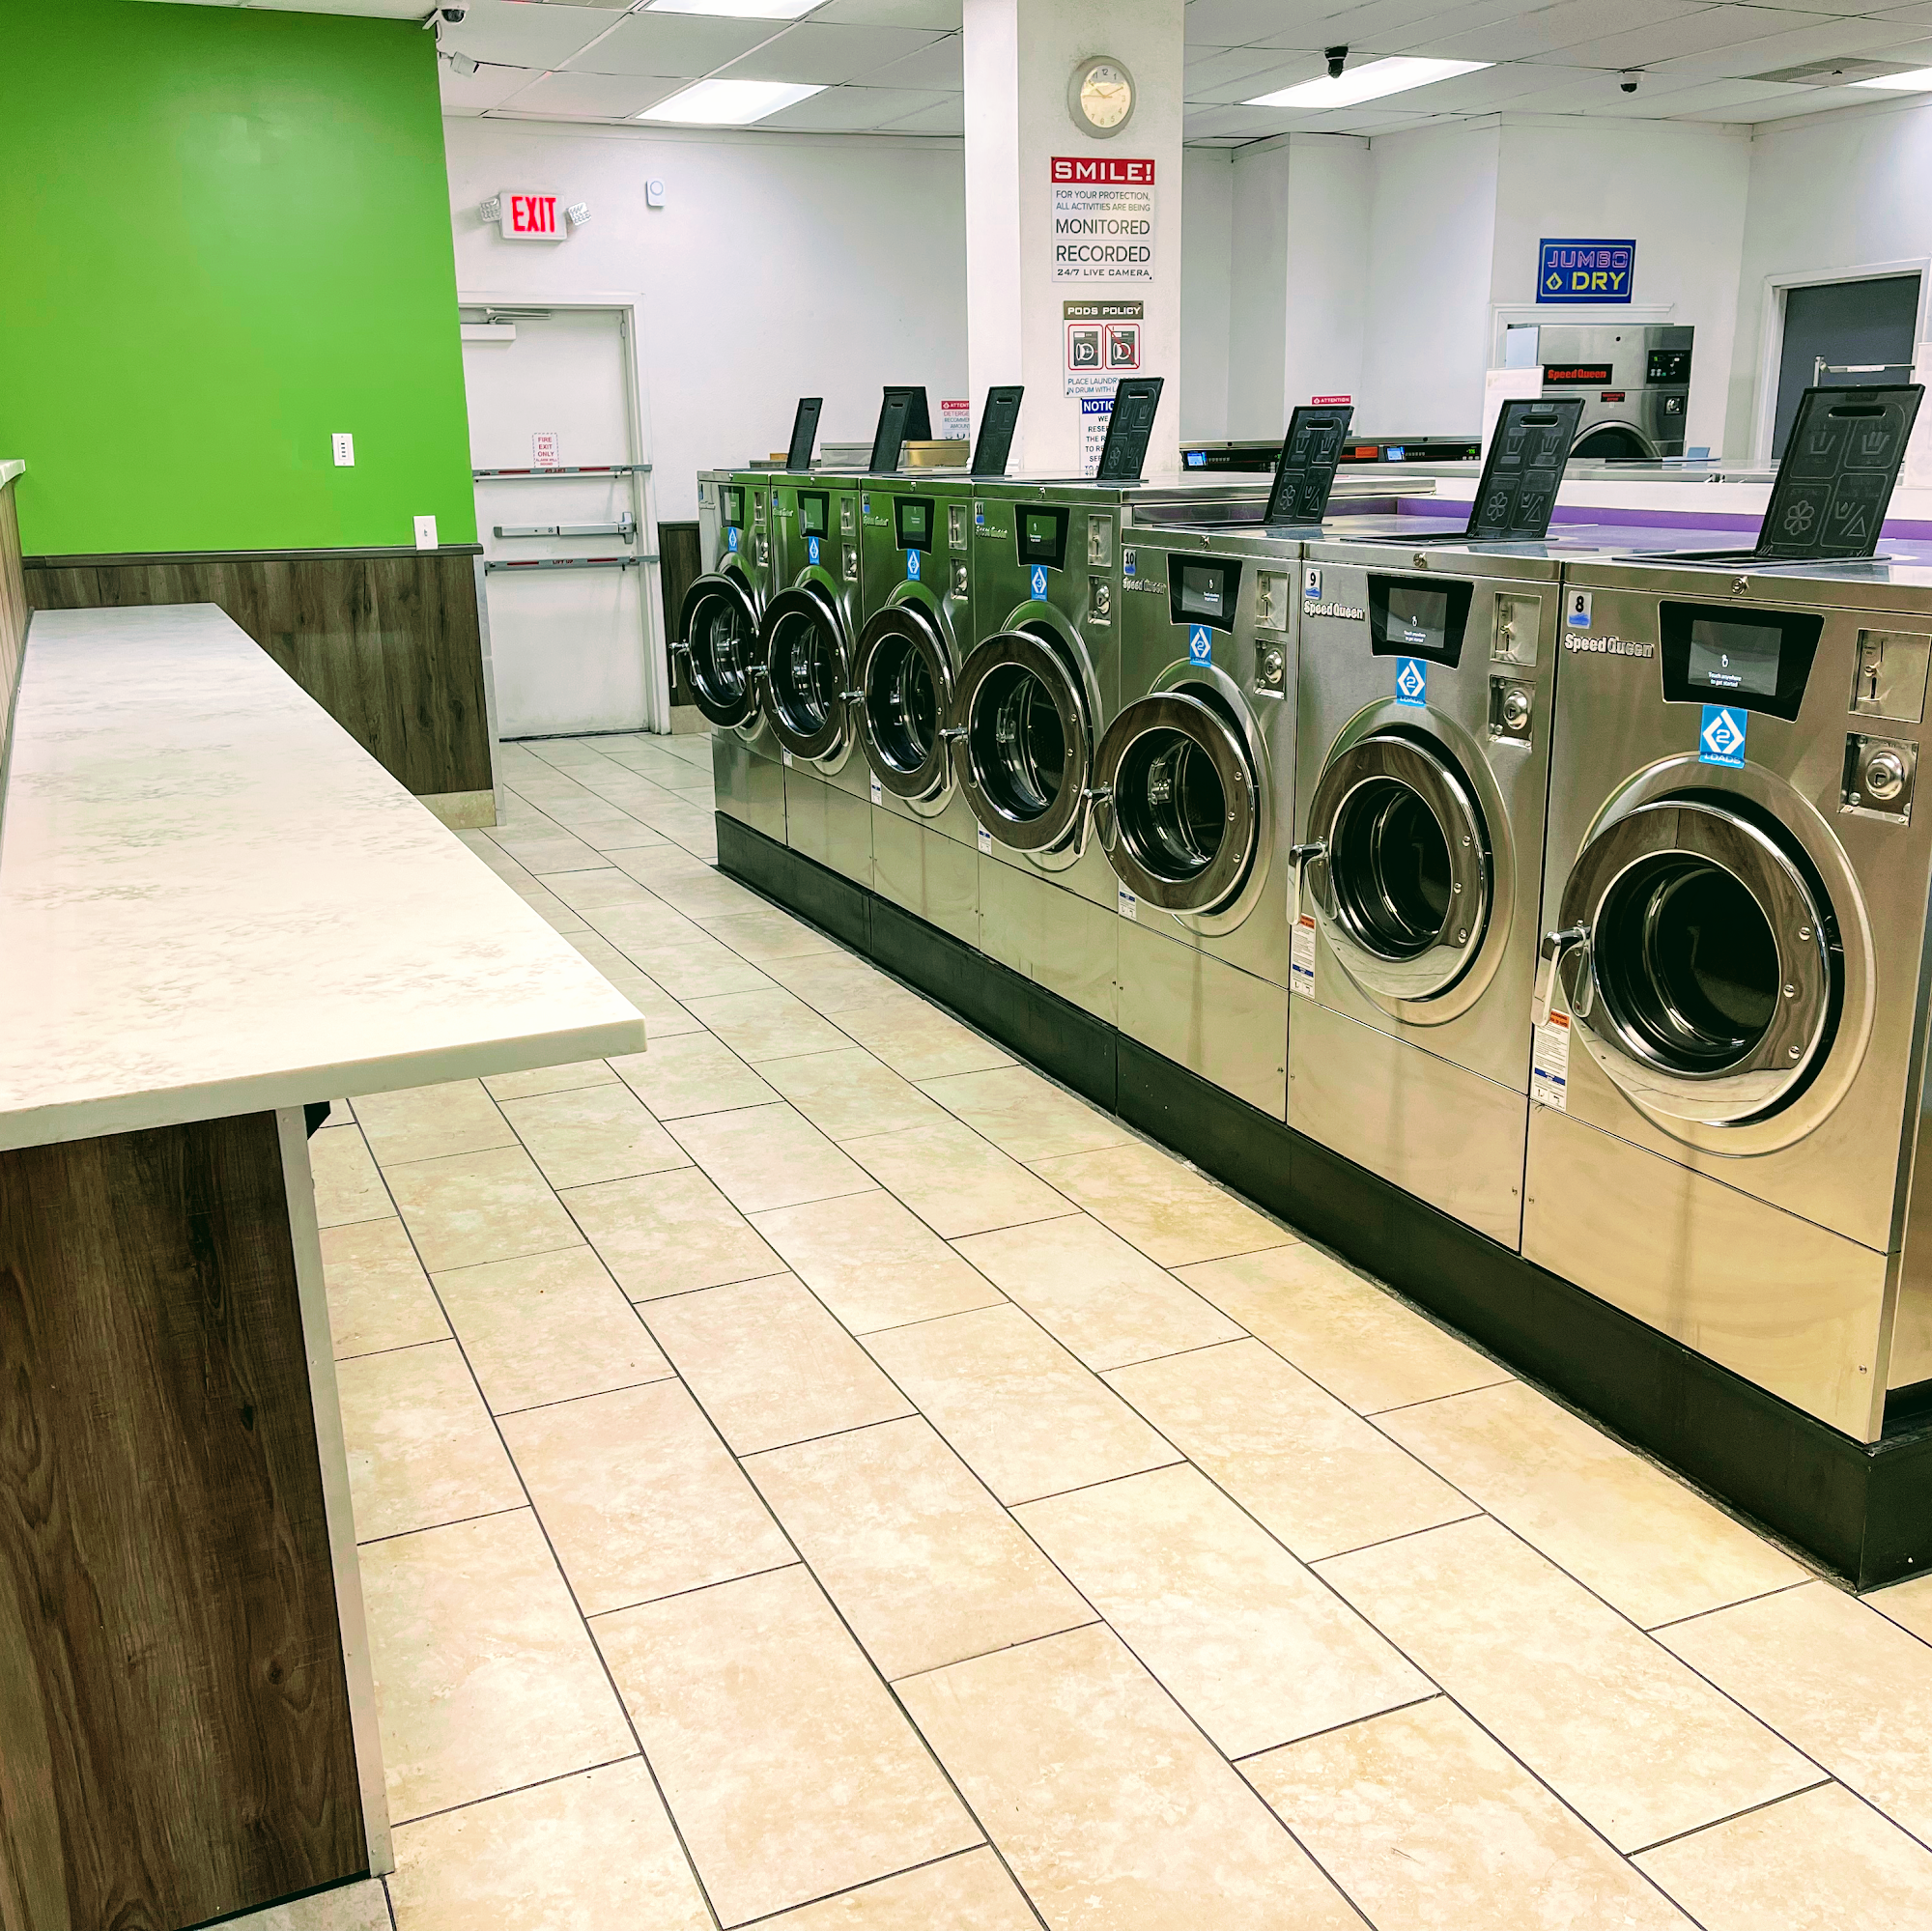 Joy Laundry - Marysville | Wash & Fold, Dry Cleaning, & Pickup/Delivery Services 1592 N Beale Rd, Marysville California 95901